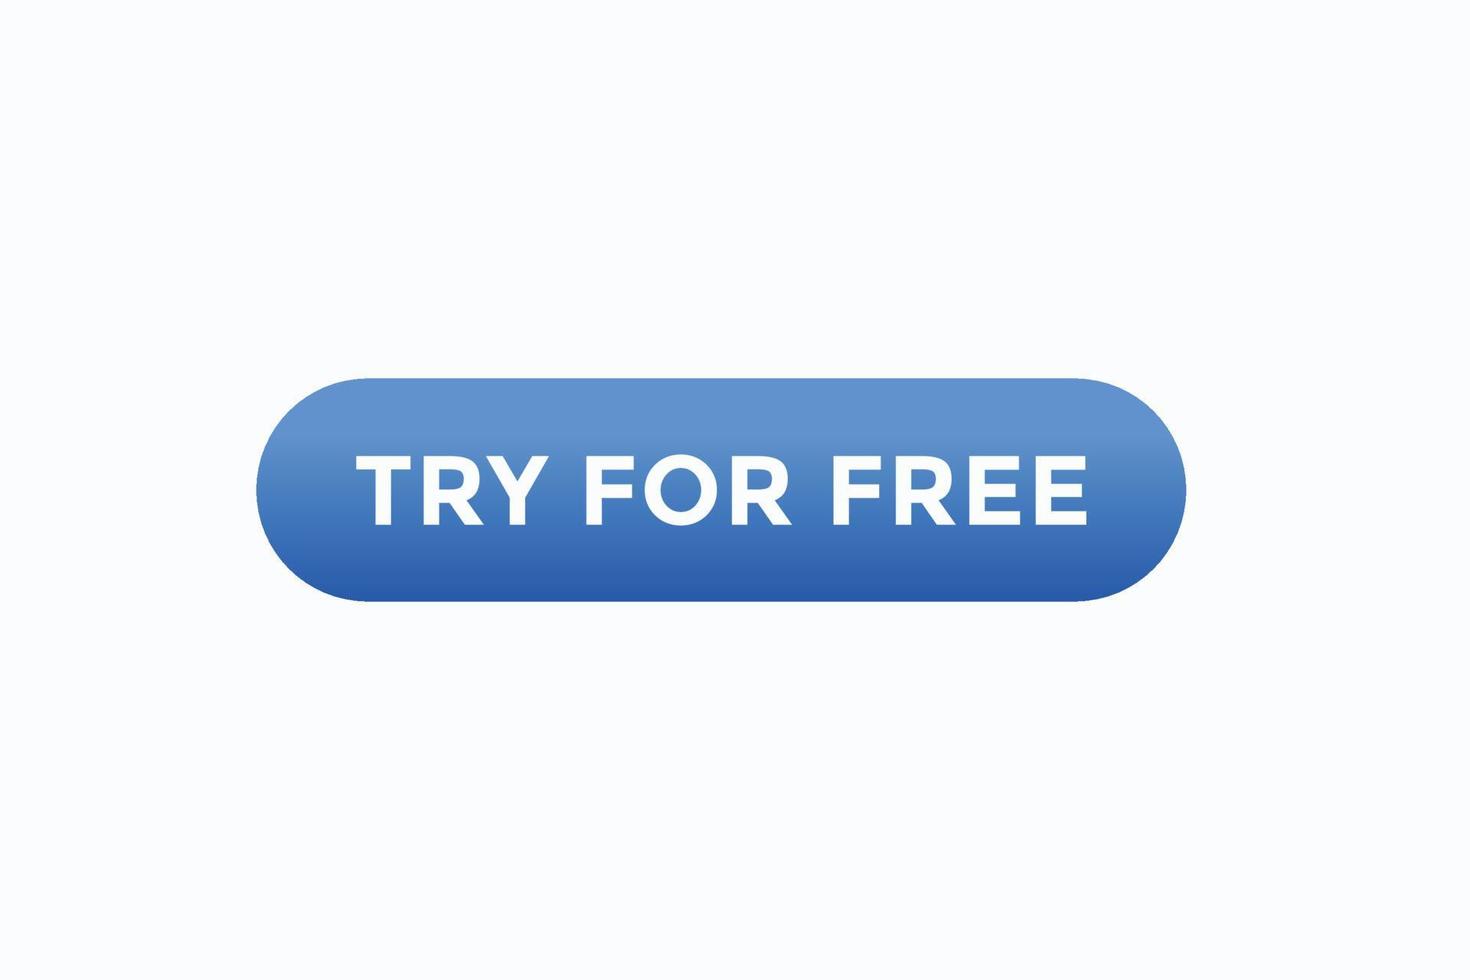 try for free button vectors.sign label speech bubble try for free vector